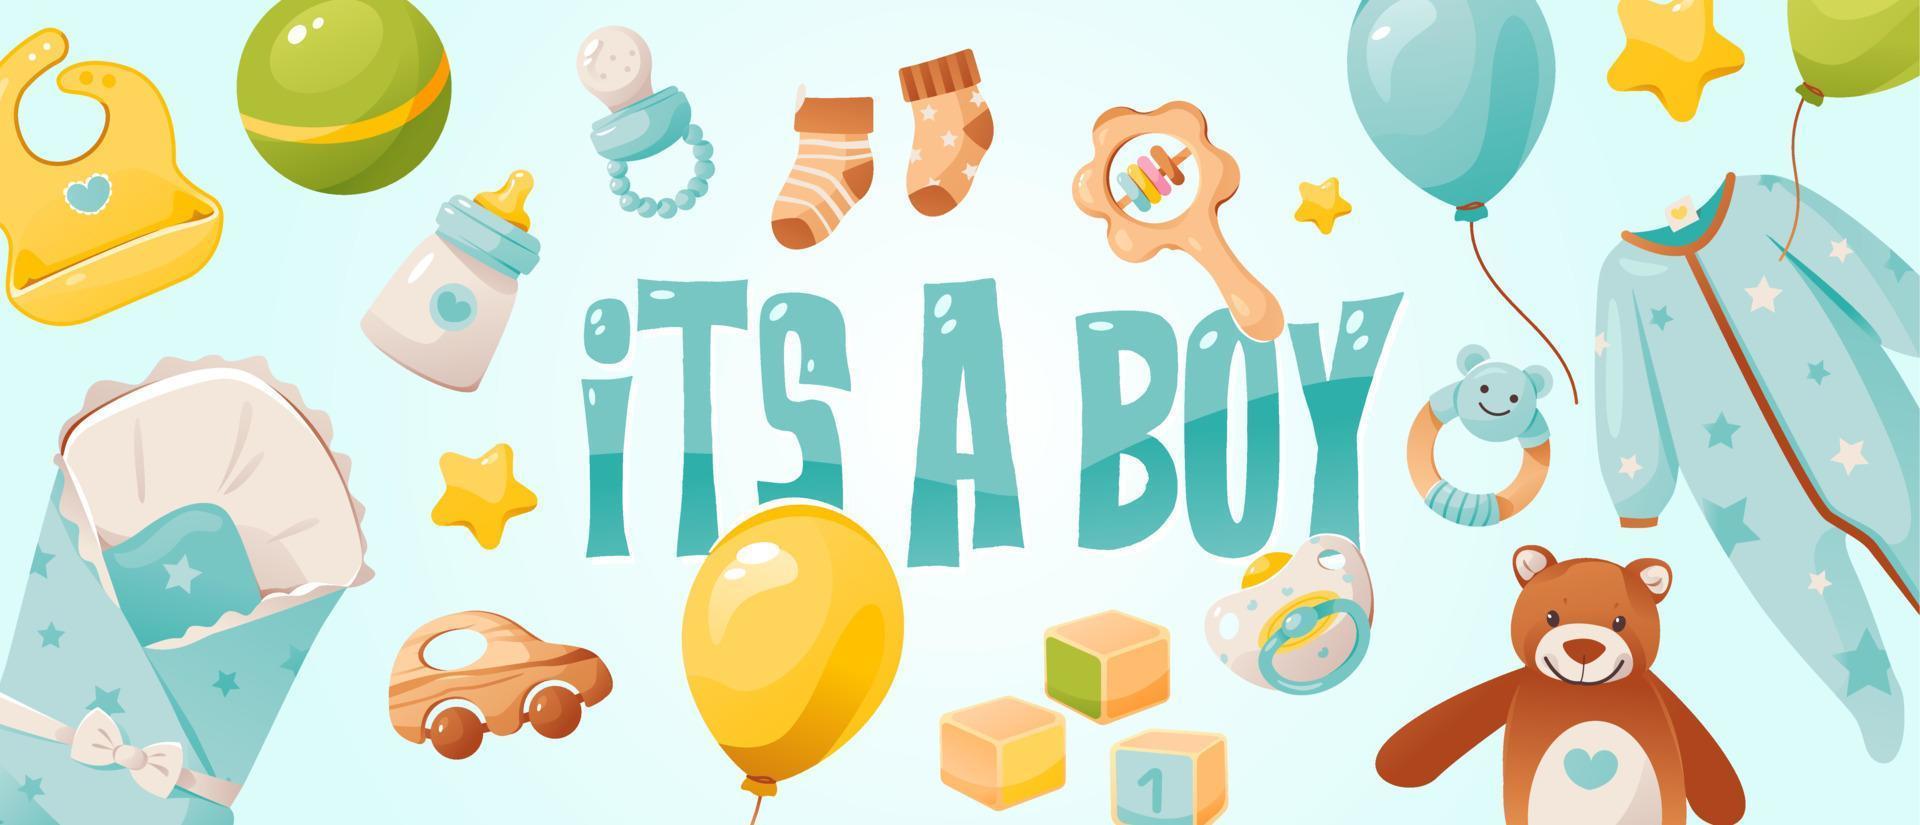 It's a boy. Baby boy shower banner or greeting card. Items for newborn baby care. Cartoon vector illustration.